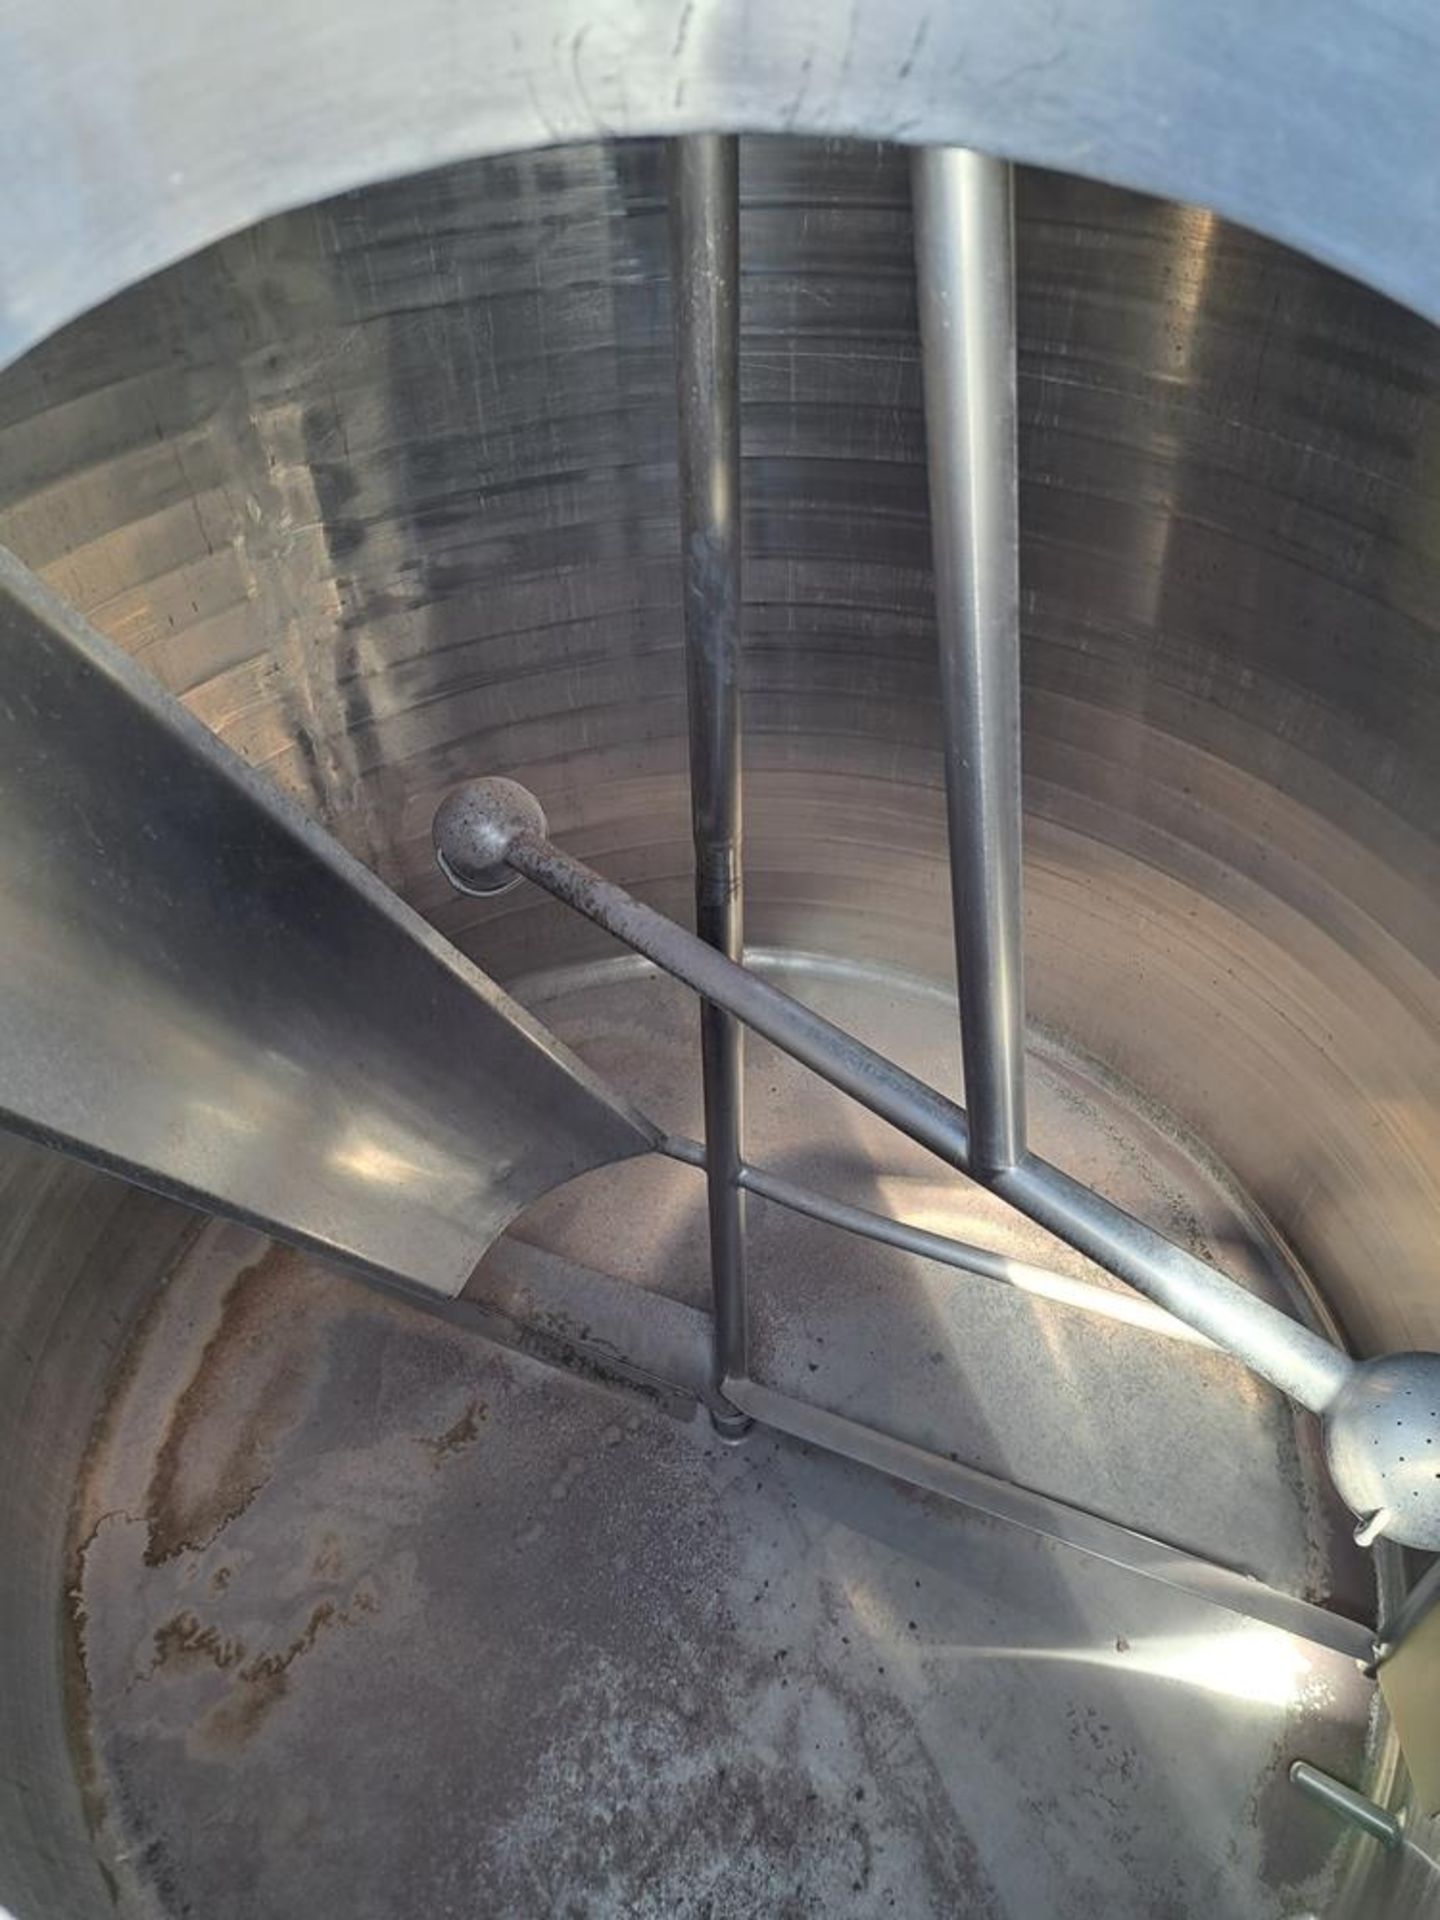 Mojonnier Bros. Mdl. 1000 Stainless Steel Jacketed Mix Tank, Ser. #1947, 6' diameter X 6' deep - Image 4 of 5